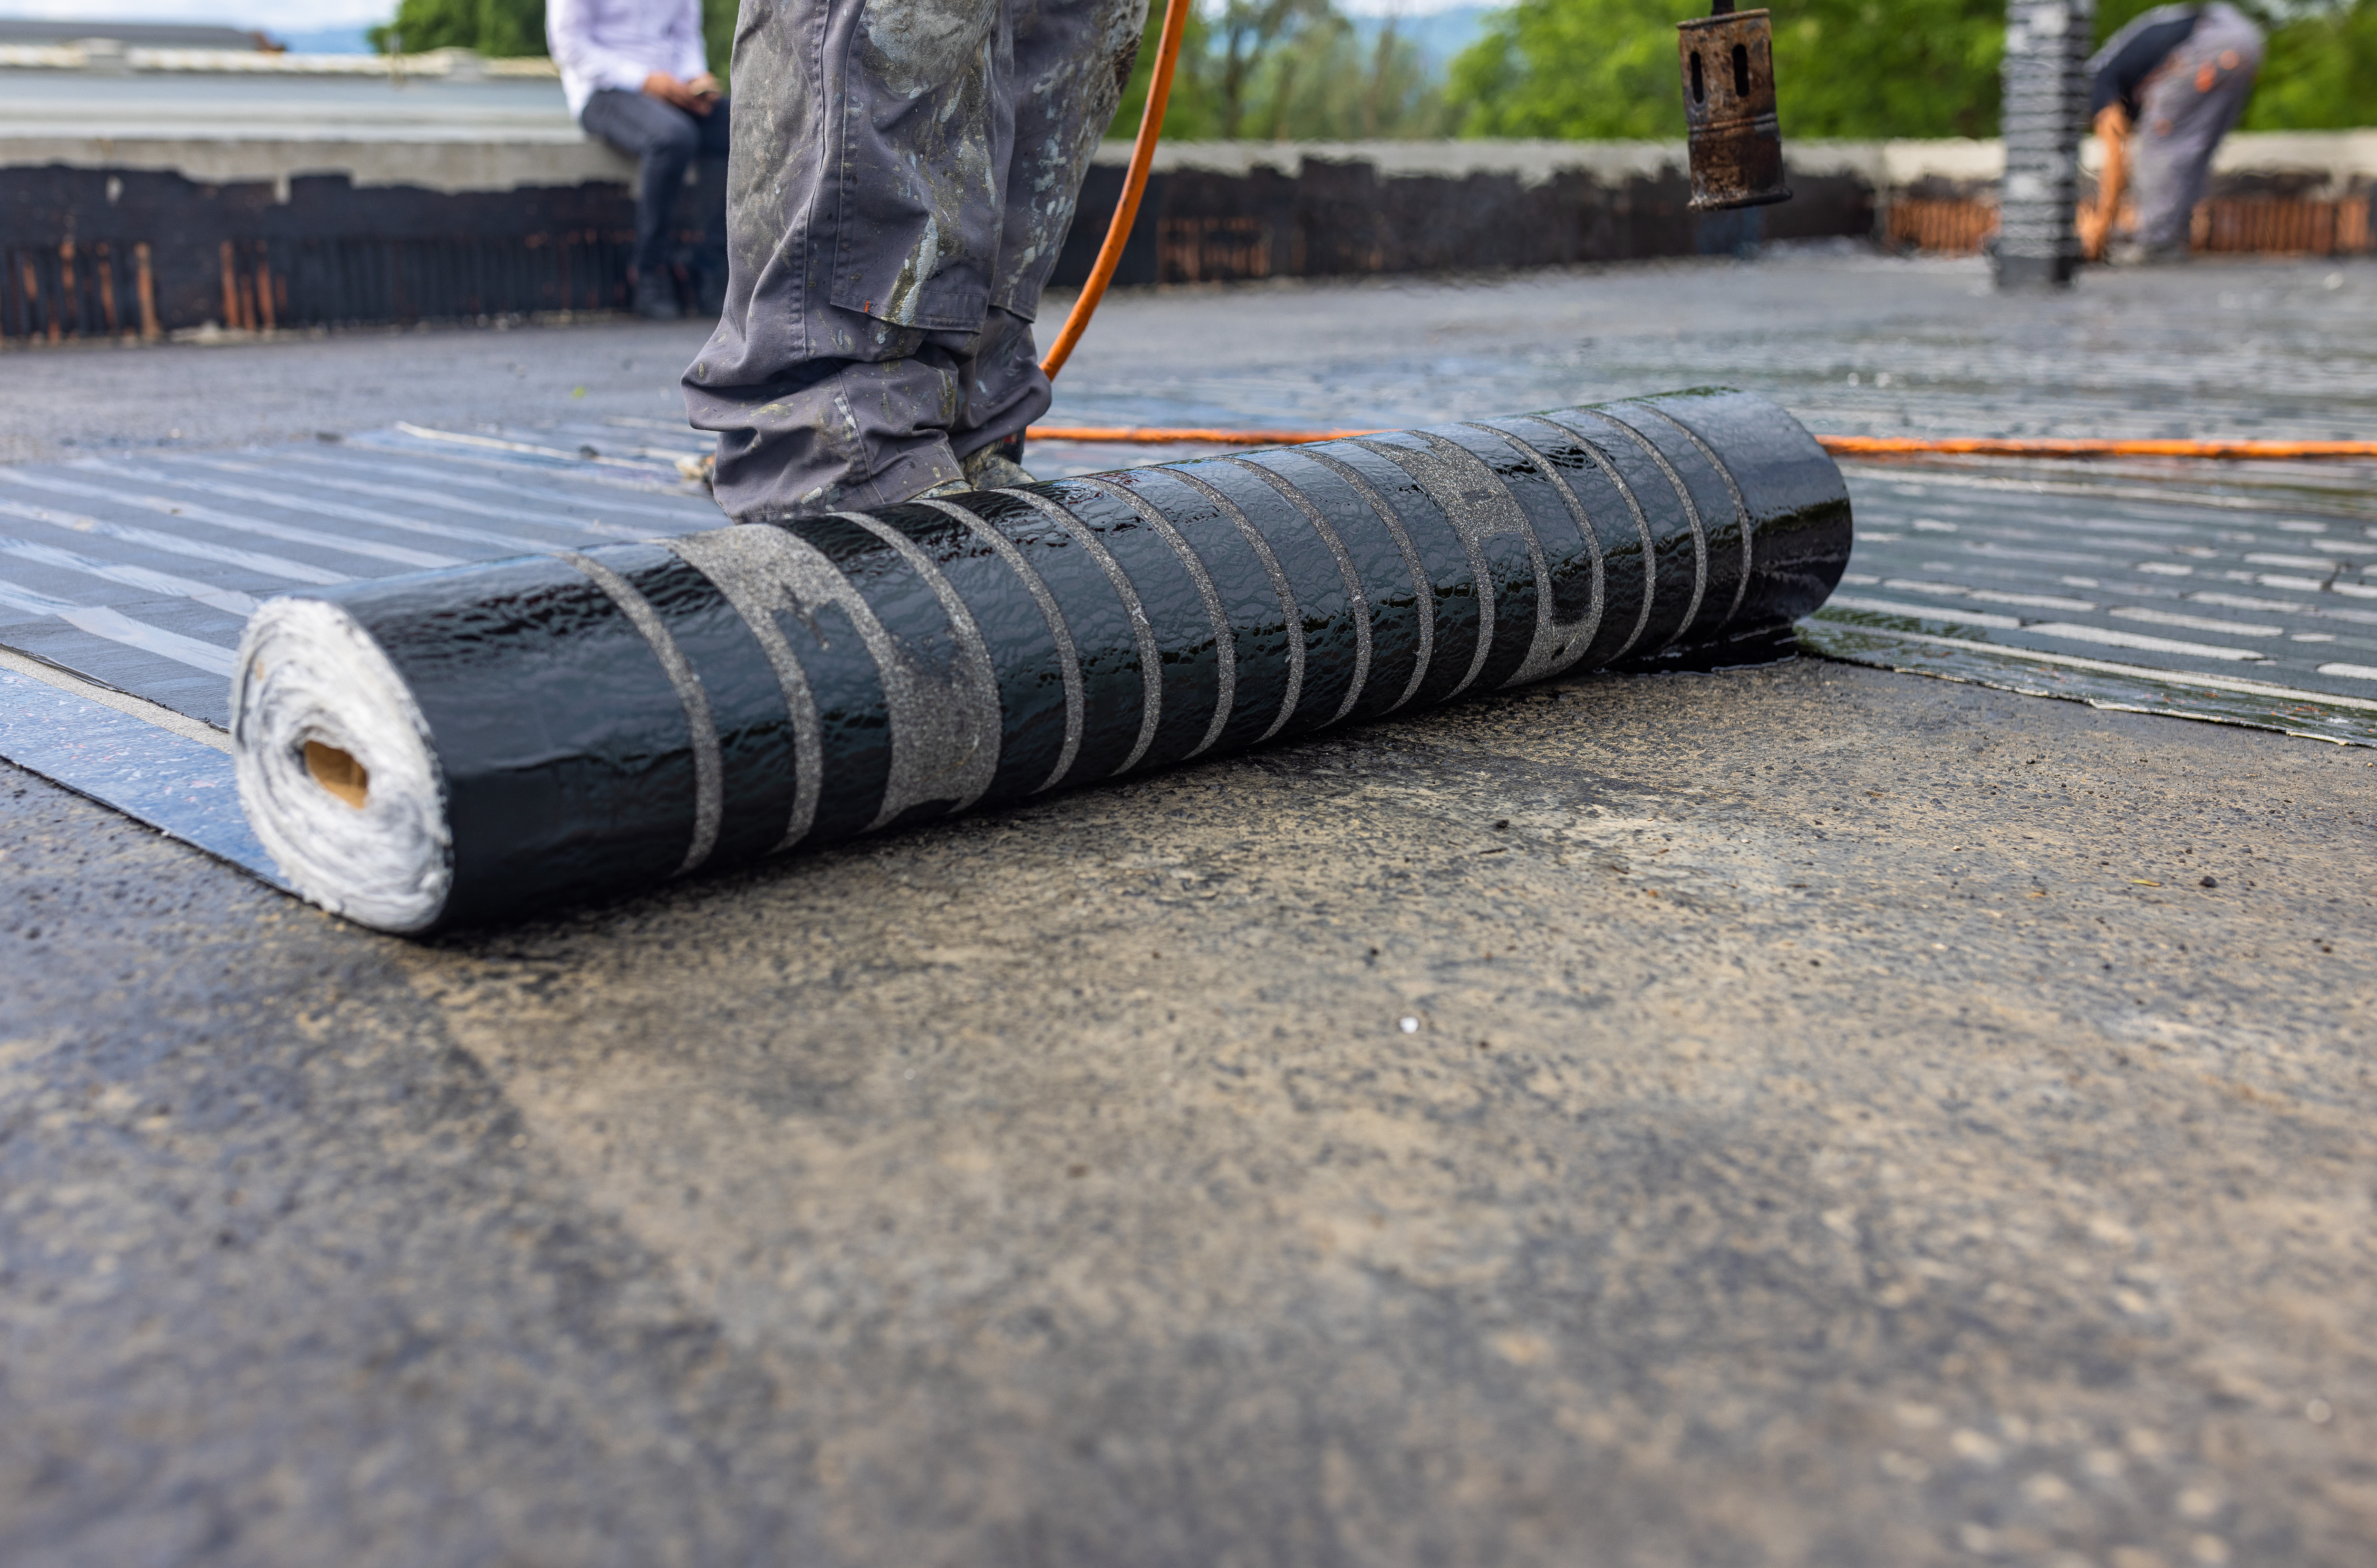 Image of a modified bitumen roofing being rolled out on a commercial building